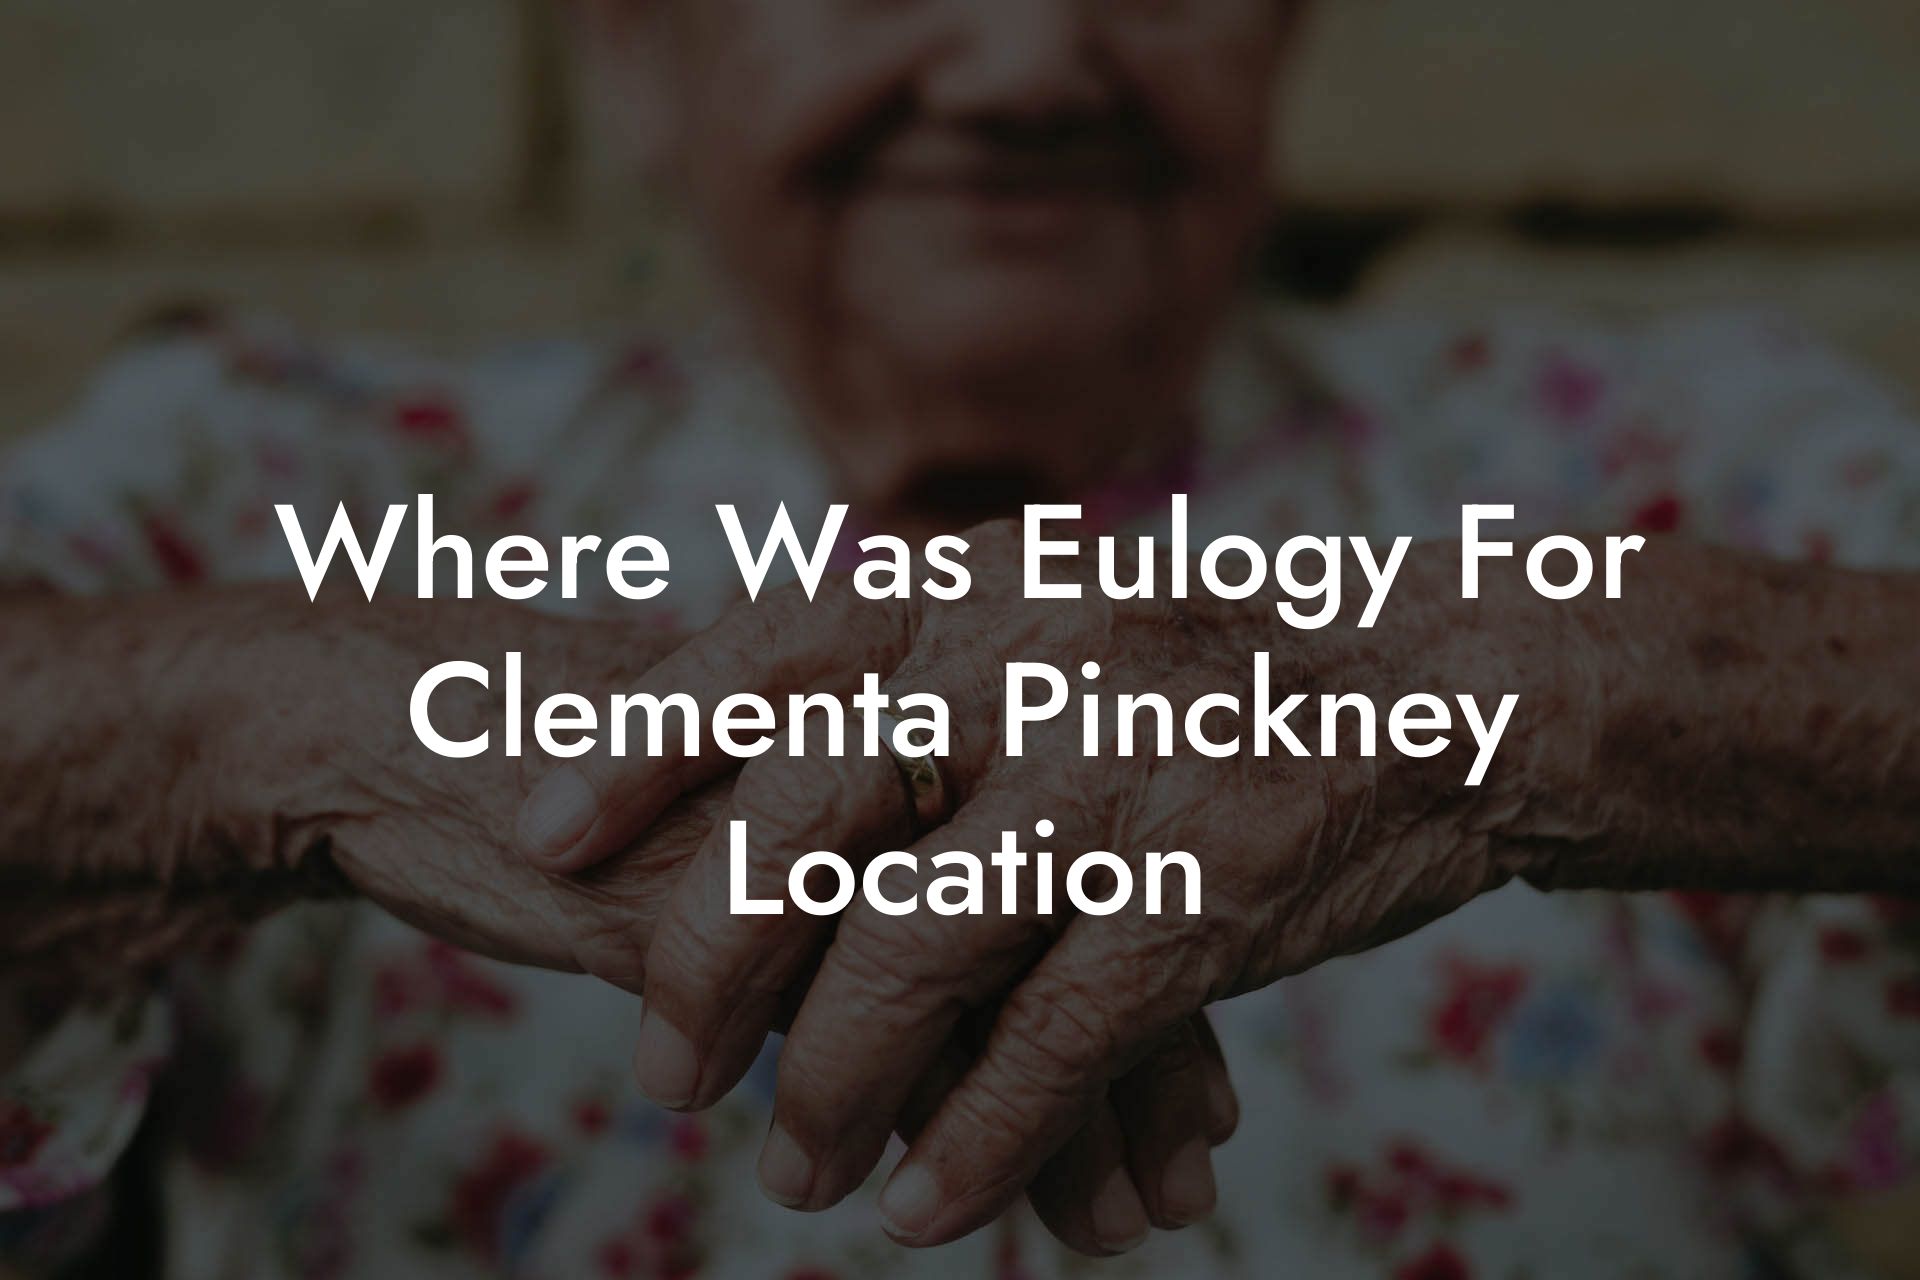 Where Was Eulogy For Clementa Pinckney Location